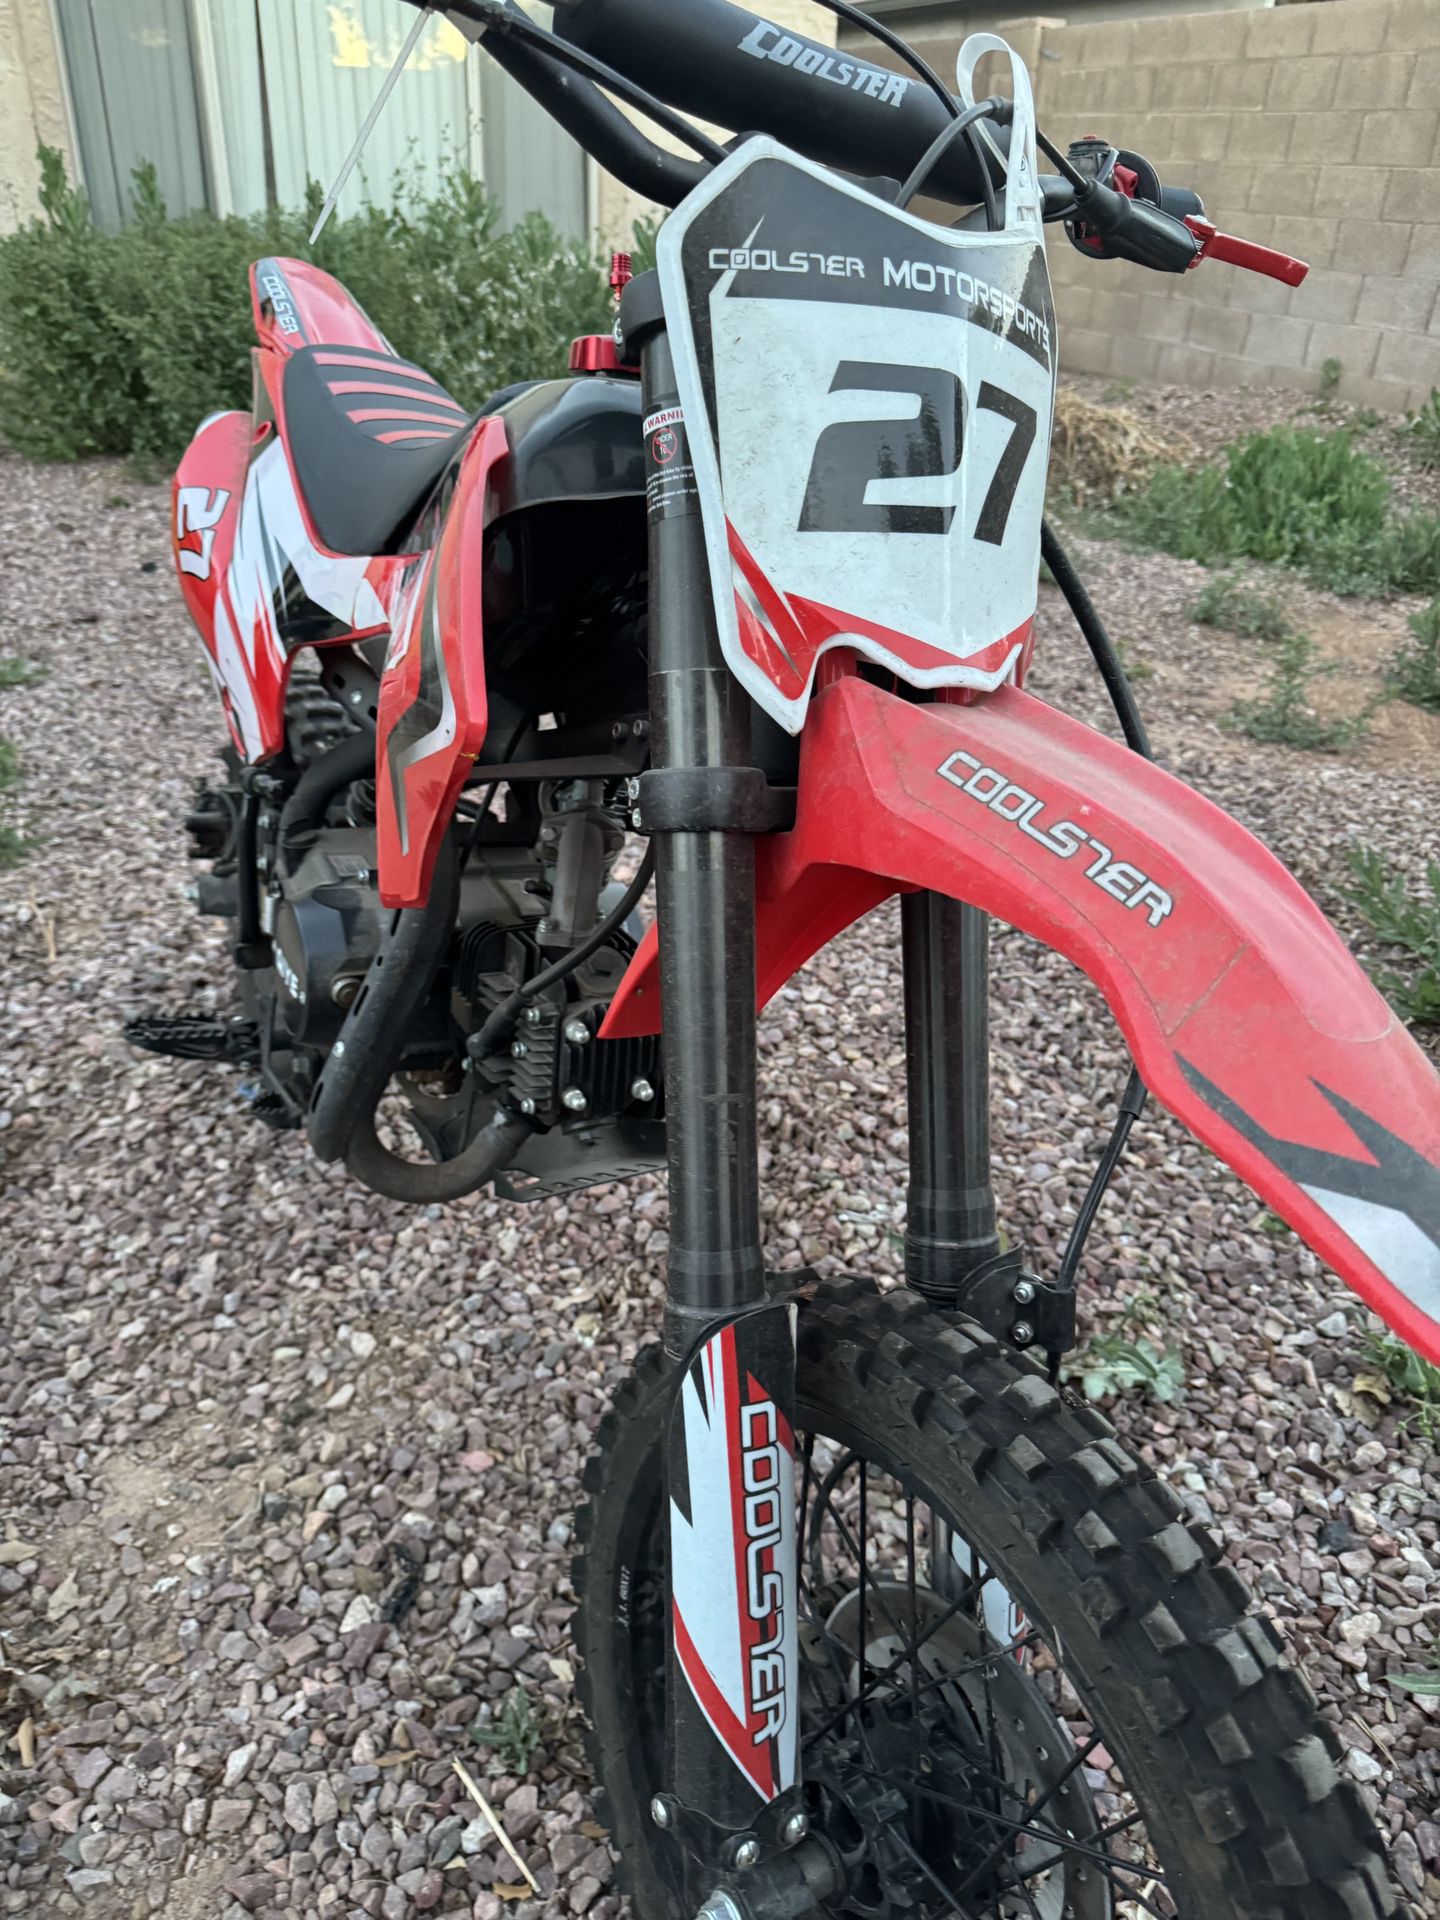 Coolster 125CC Manual Clutch Mid Size Dirt Bike Trade